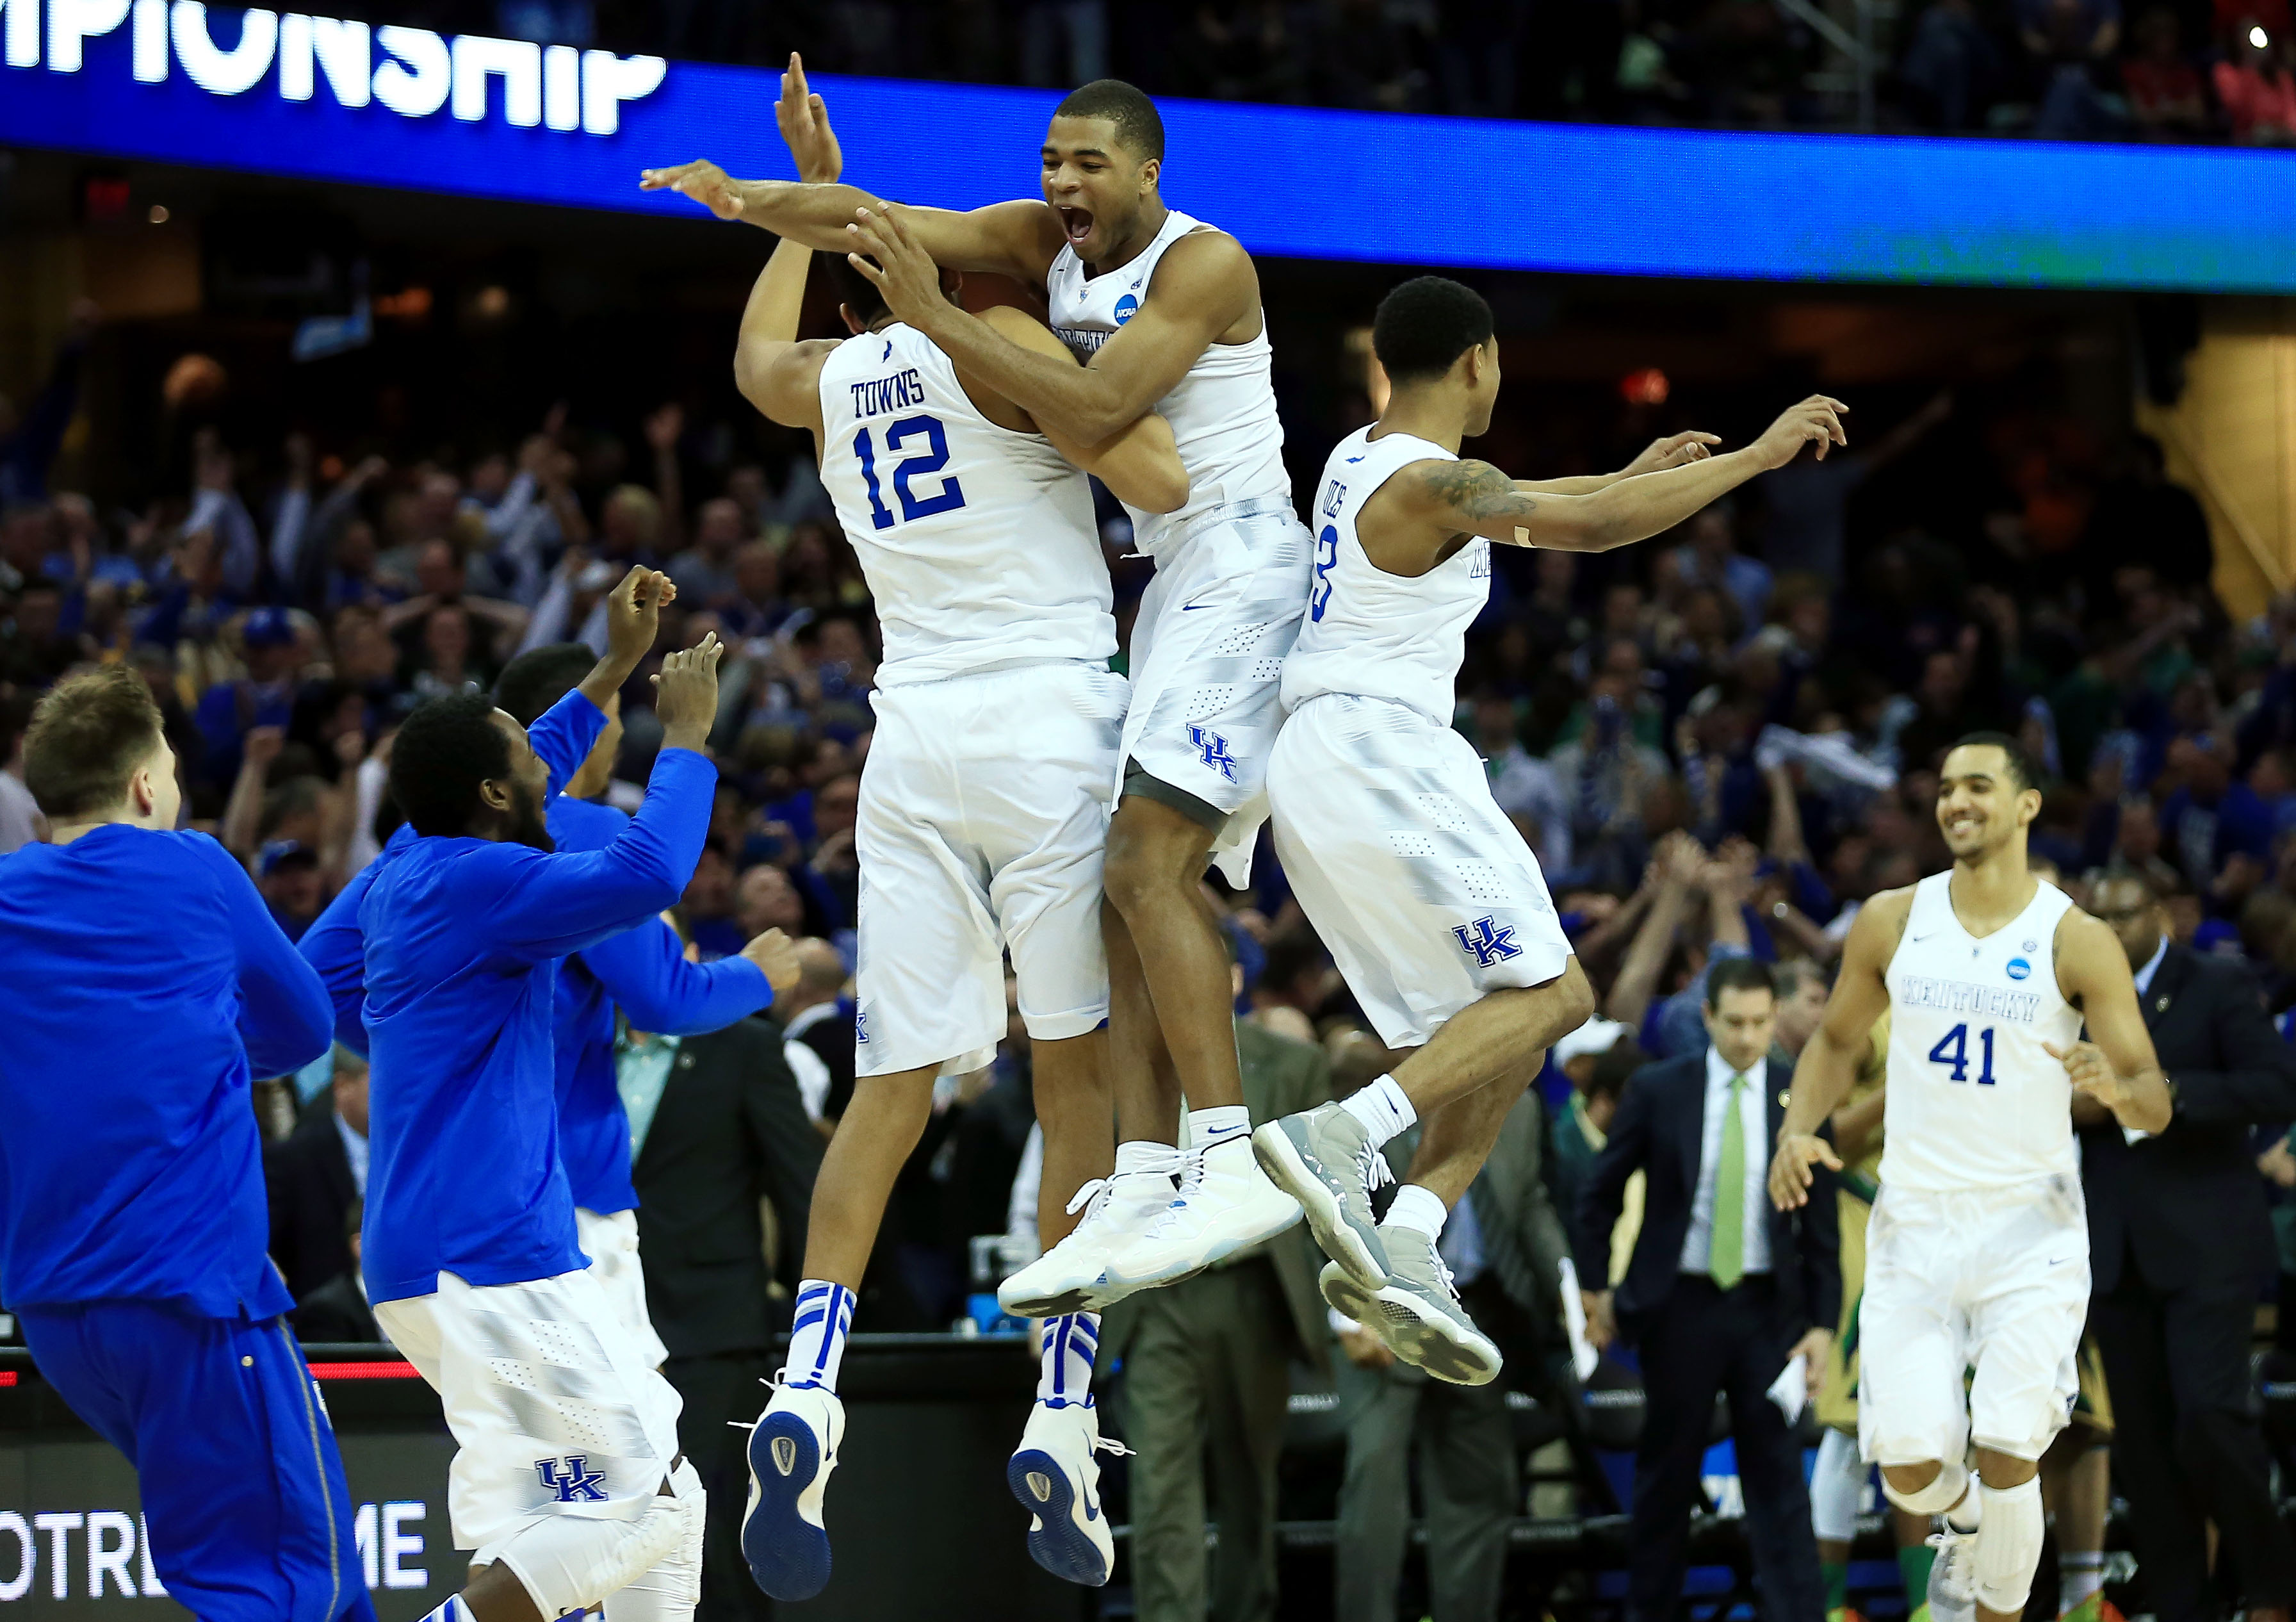 Mar 28, 2015; Cleveland, OH, USA; Kentucky Wildcats forward Karl-Anthony Towns (12) and guard Aaron Harrison (2) and guard Tyler Ulis (3) jump in the air after the game against the Notre Dame Fighting Irish in the finals of the midwest regional of the 2015 NCAA Tournament at Quicken Loans Arena. Kentucky won 68-66. Mandatory Credit: Andrew Weber-USA TODAY Sports